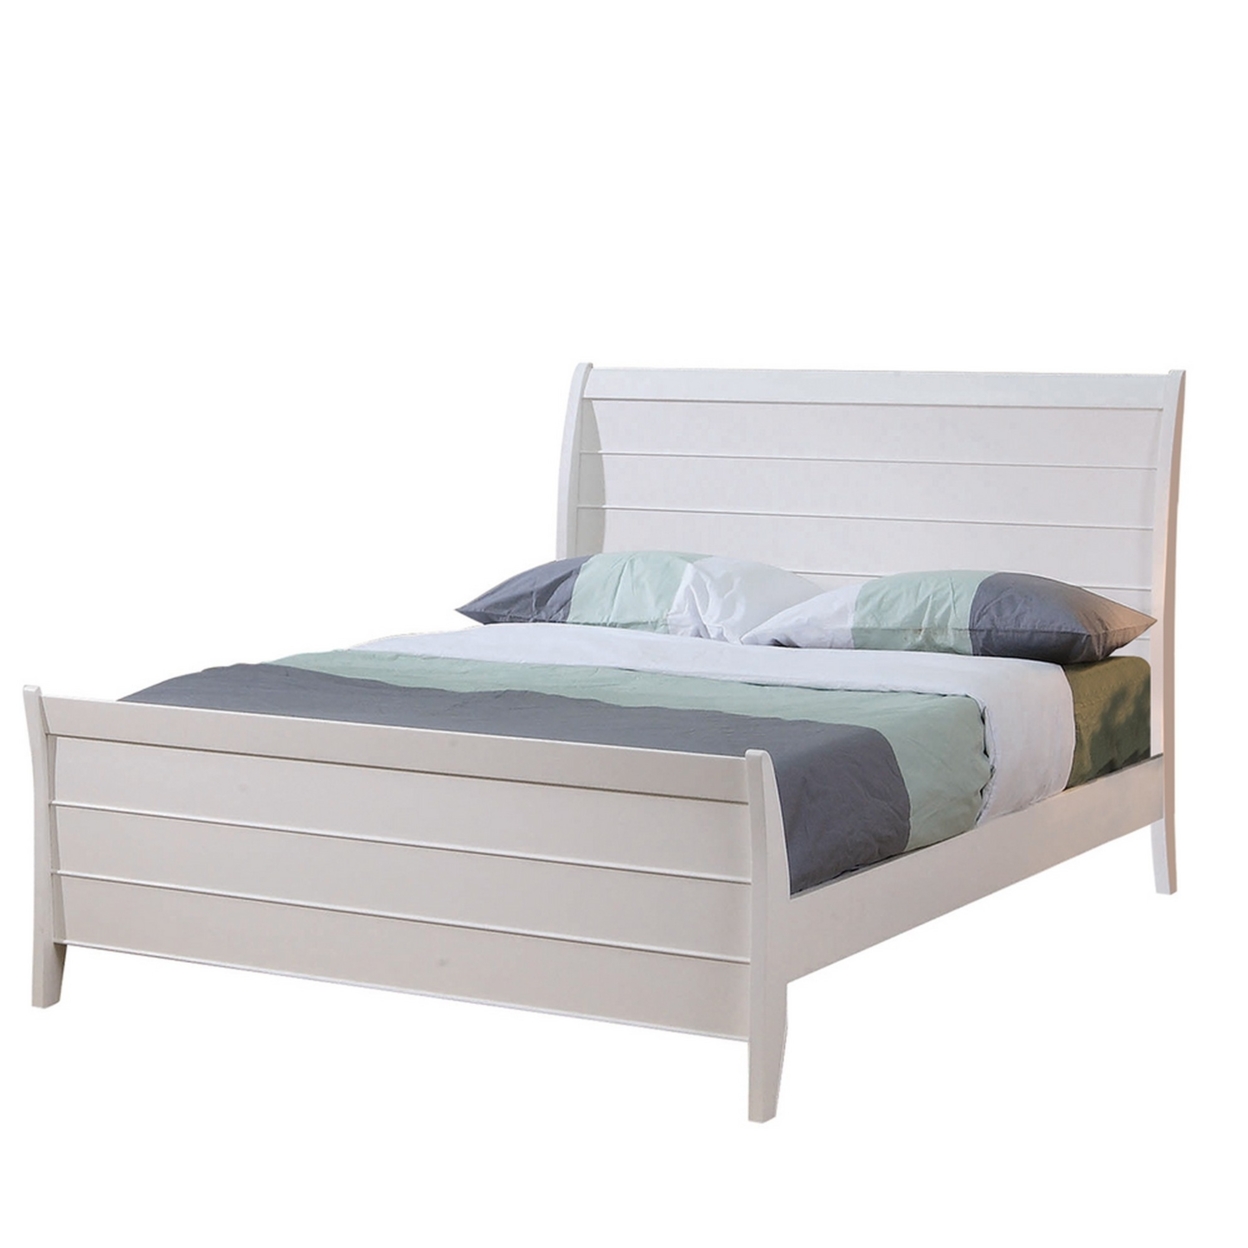 Minimally Designed Wooden Sleigh Style Twin Bed With Tapered Legs, White- Saltoro Sherpi